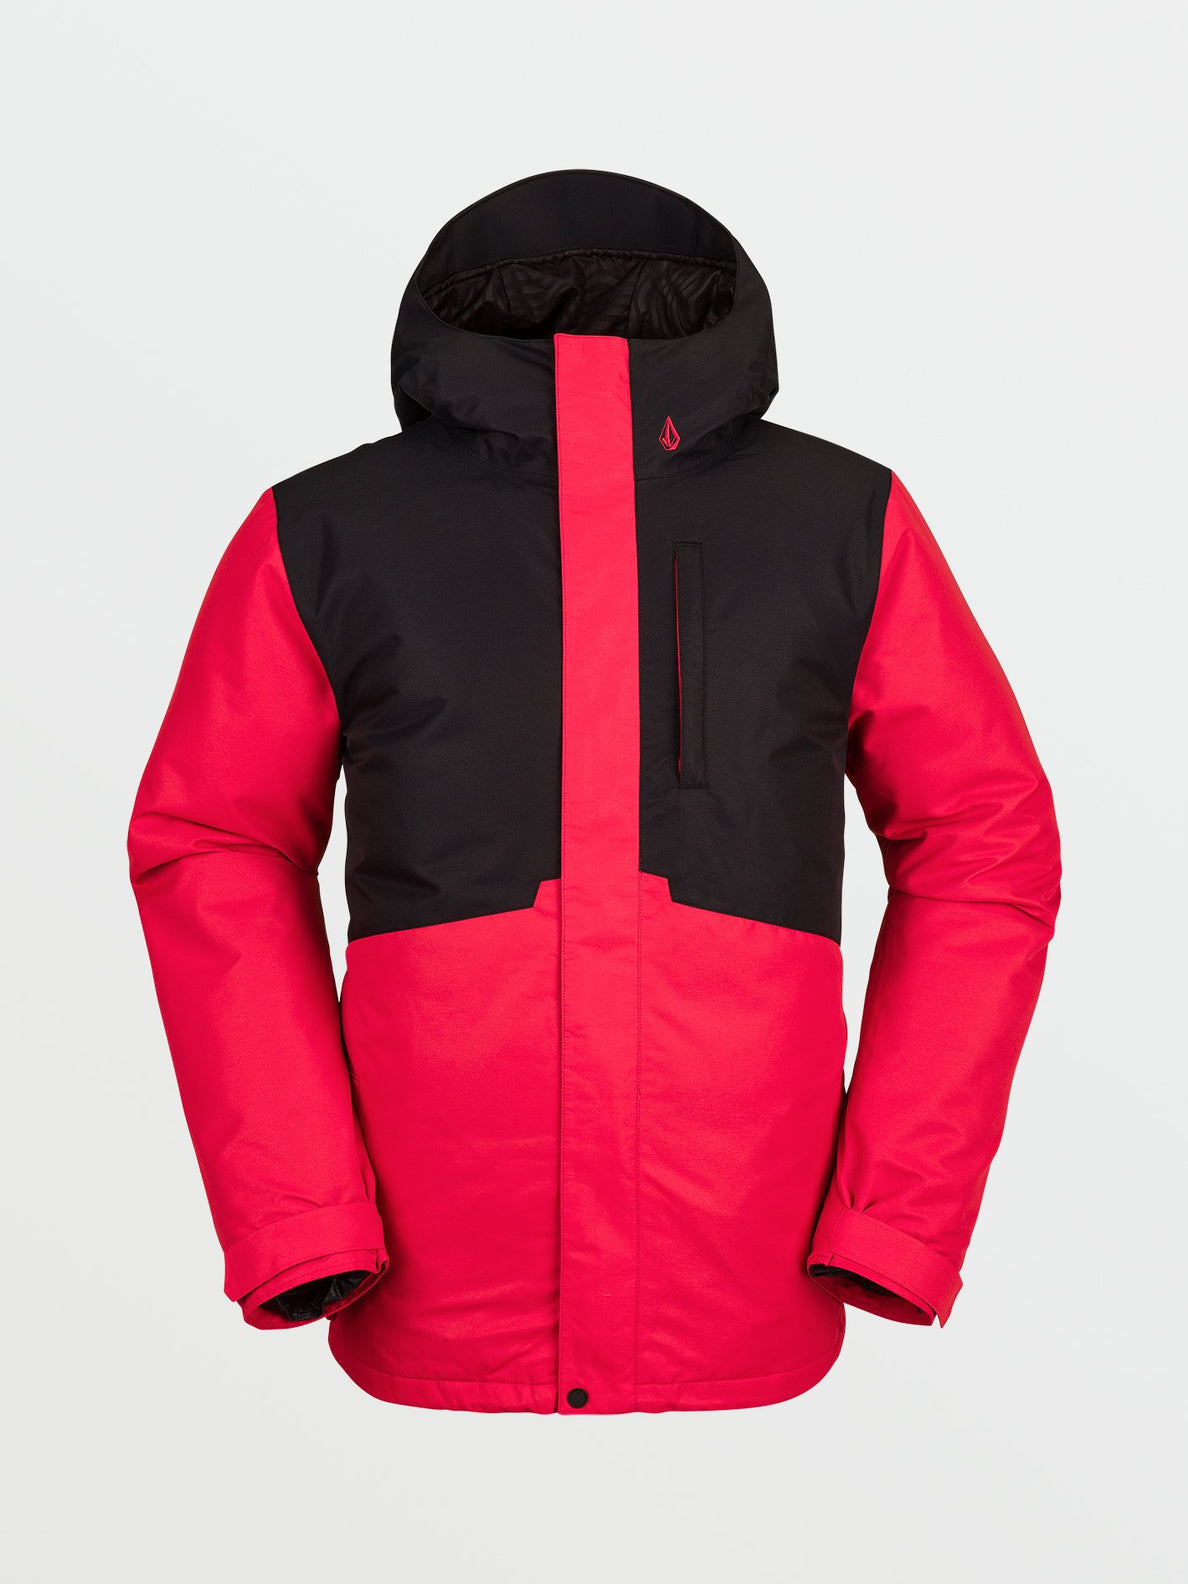 17Forty Insulated Jacket - RED COMBO (G0452114_RDC) [F]